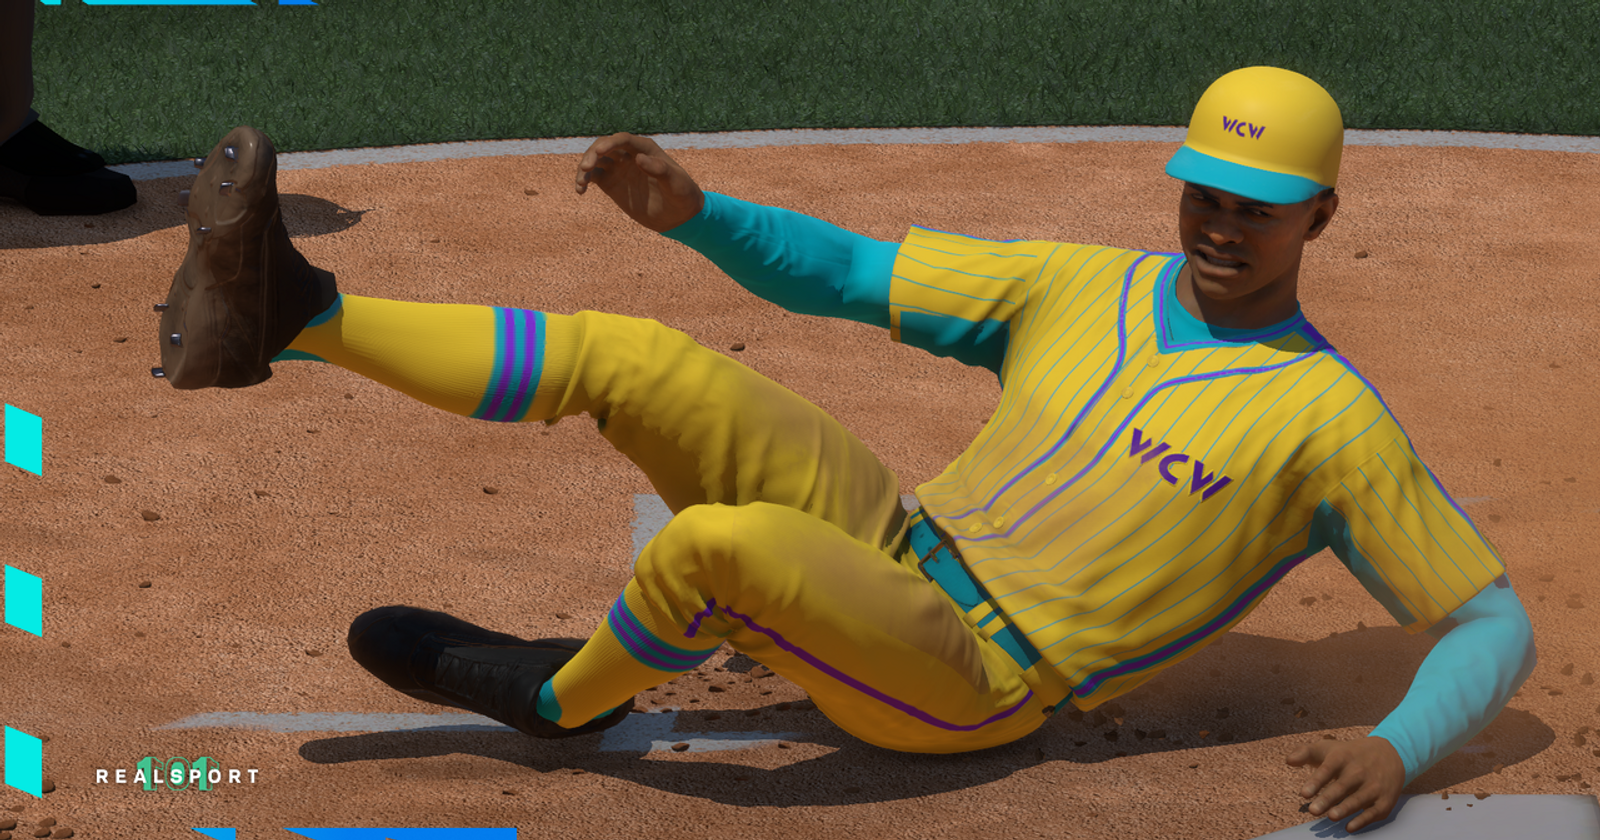 UPDATED* MLB The Show 21: Baserunning Survival Guide - Steal Bases